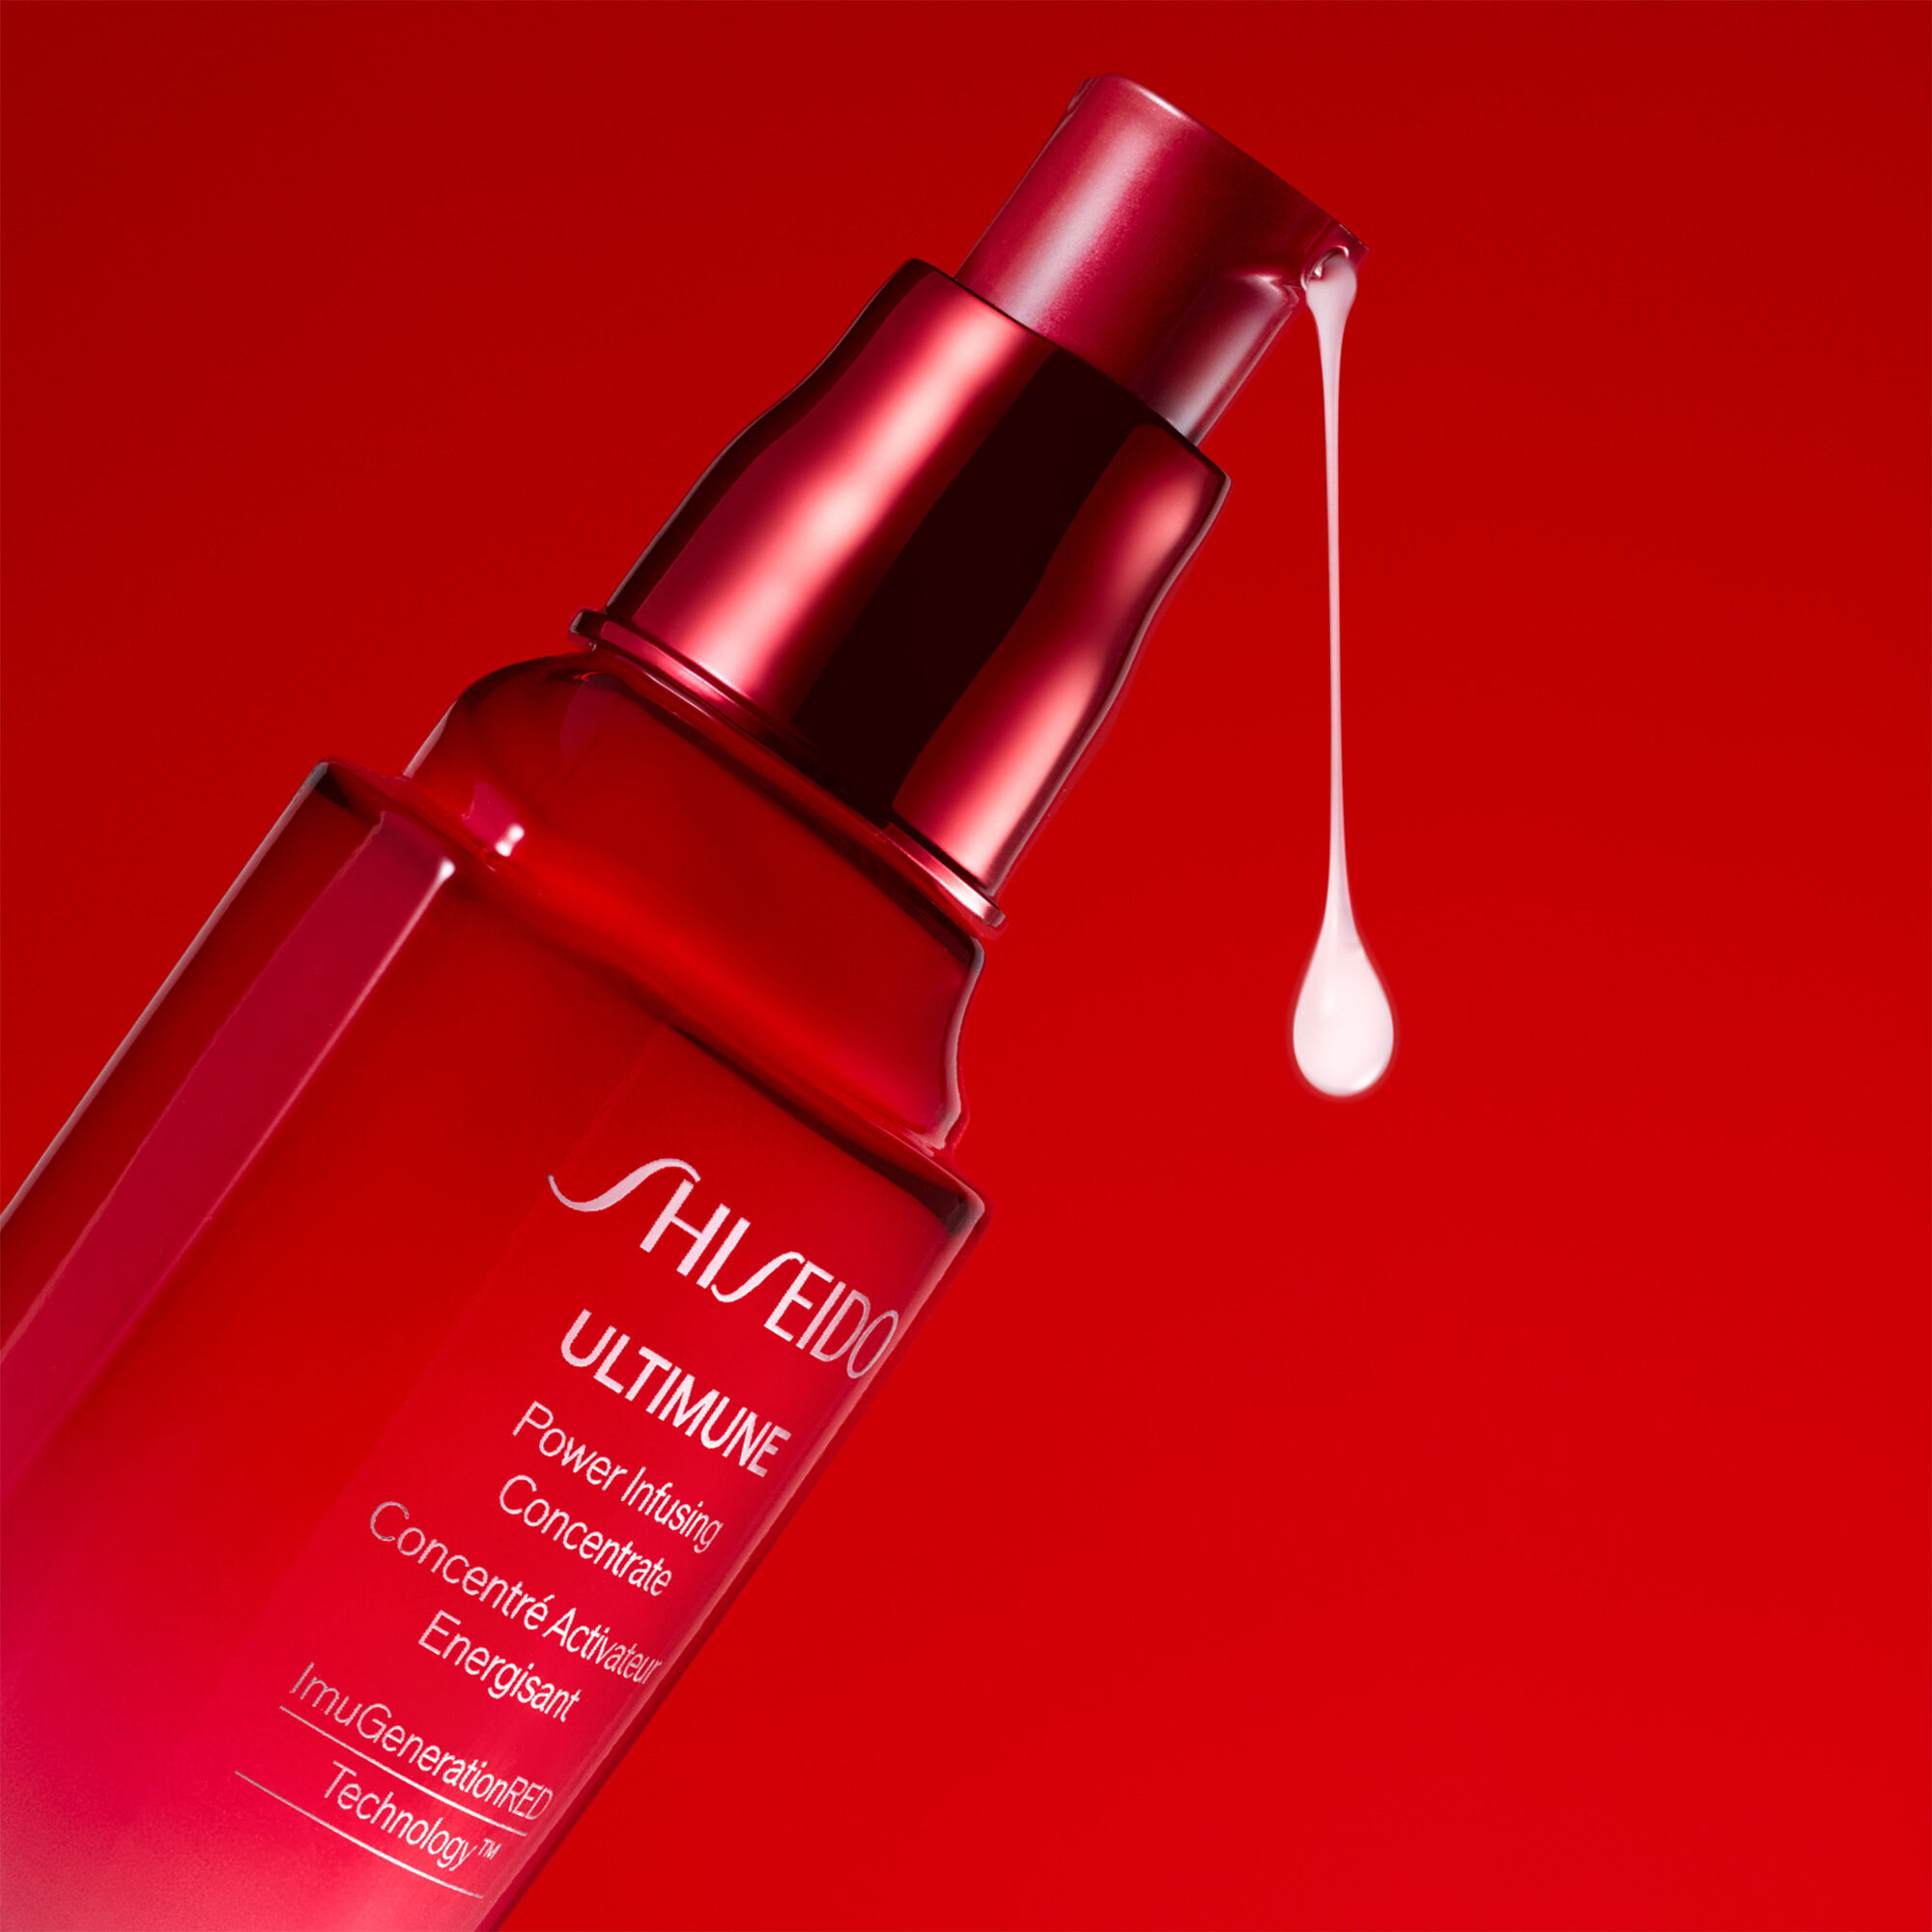 Ultimune Power Infusing Concentrate Face Serum | SHISEIDO